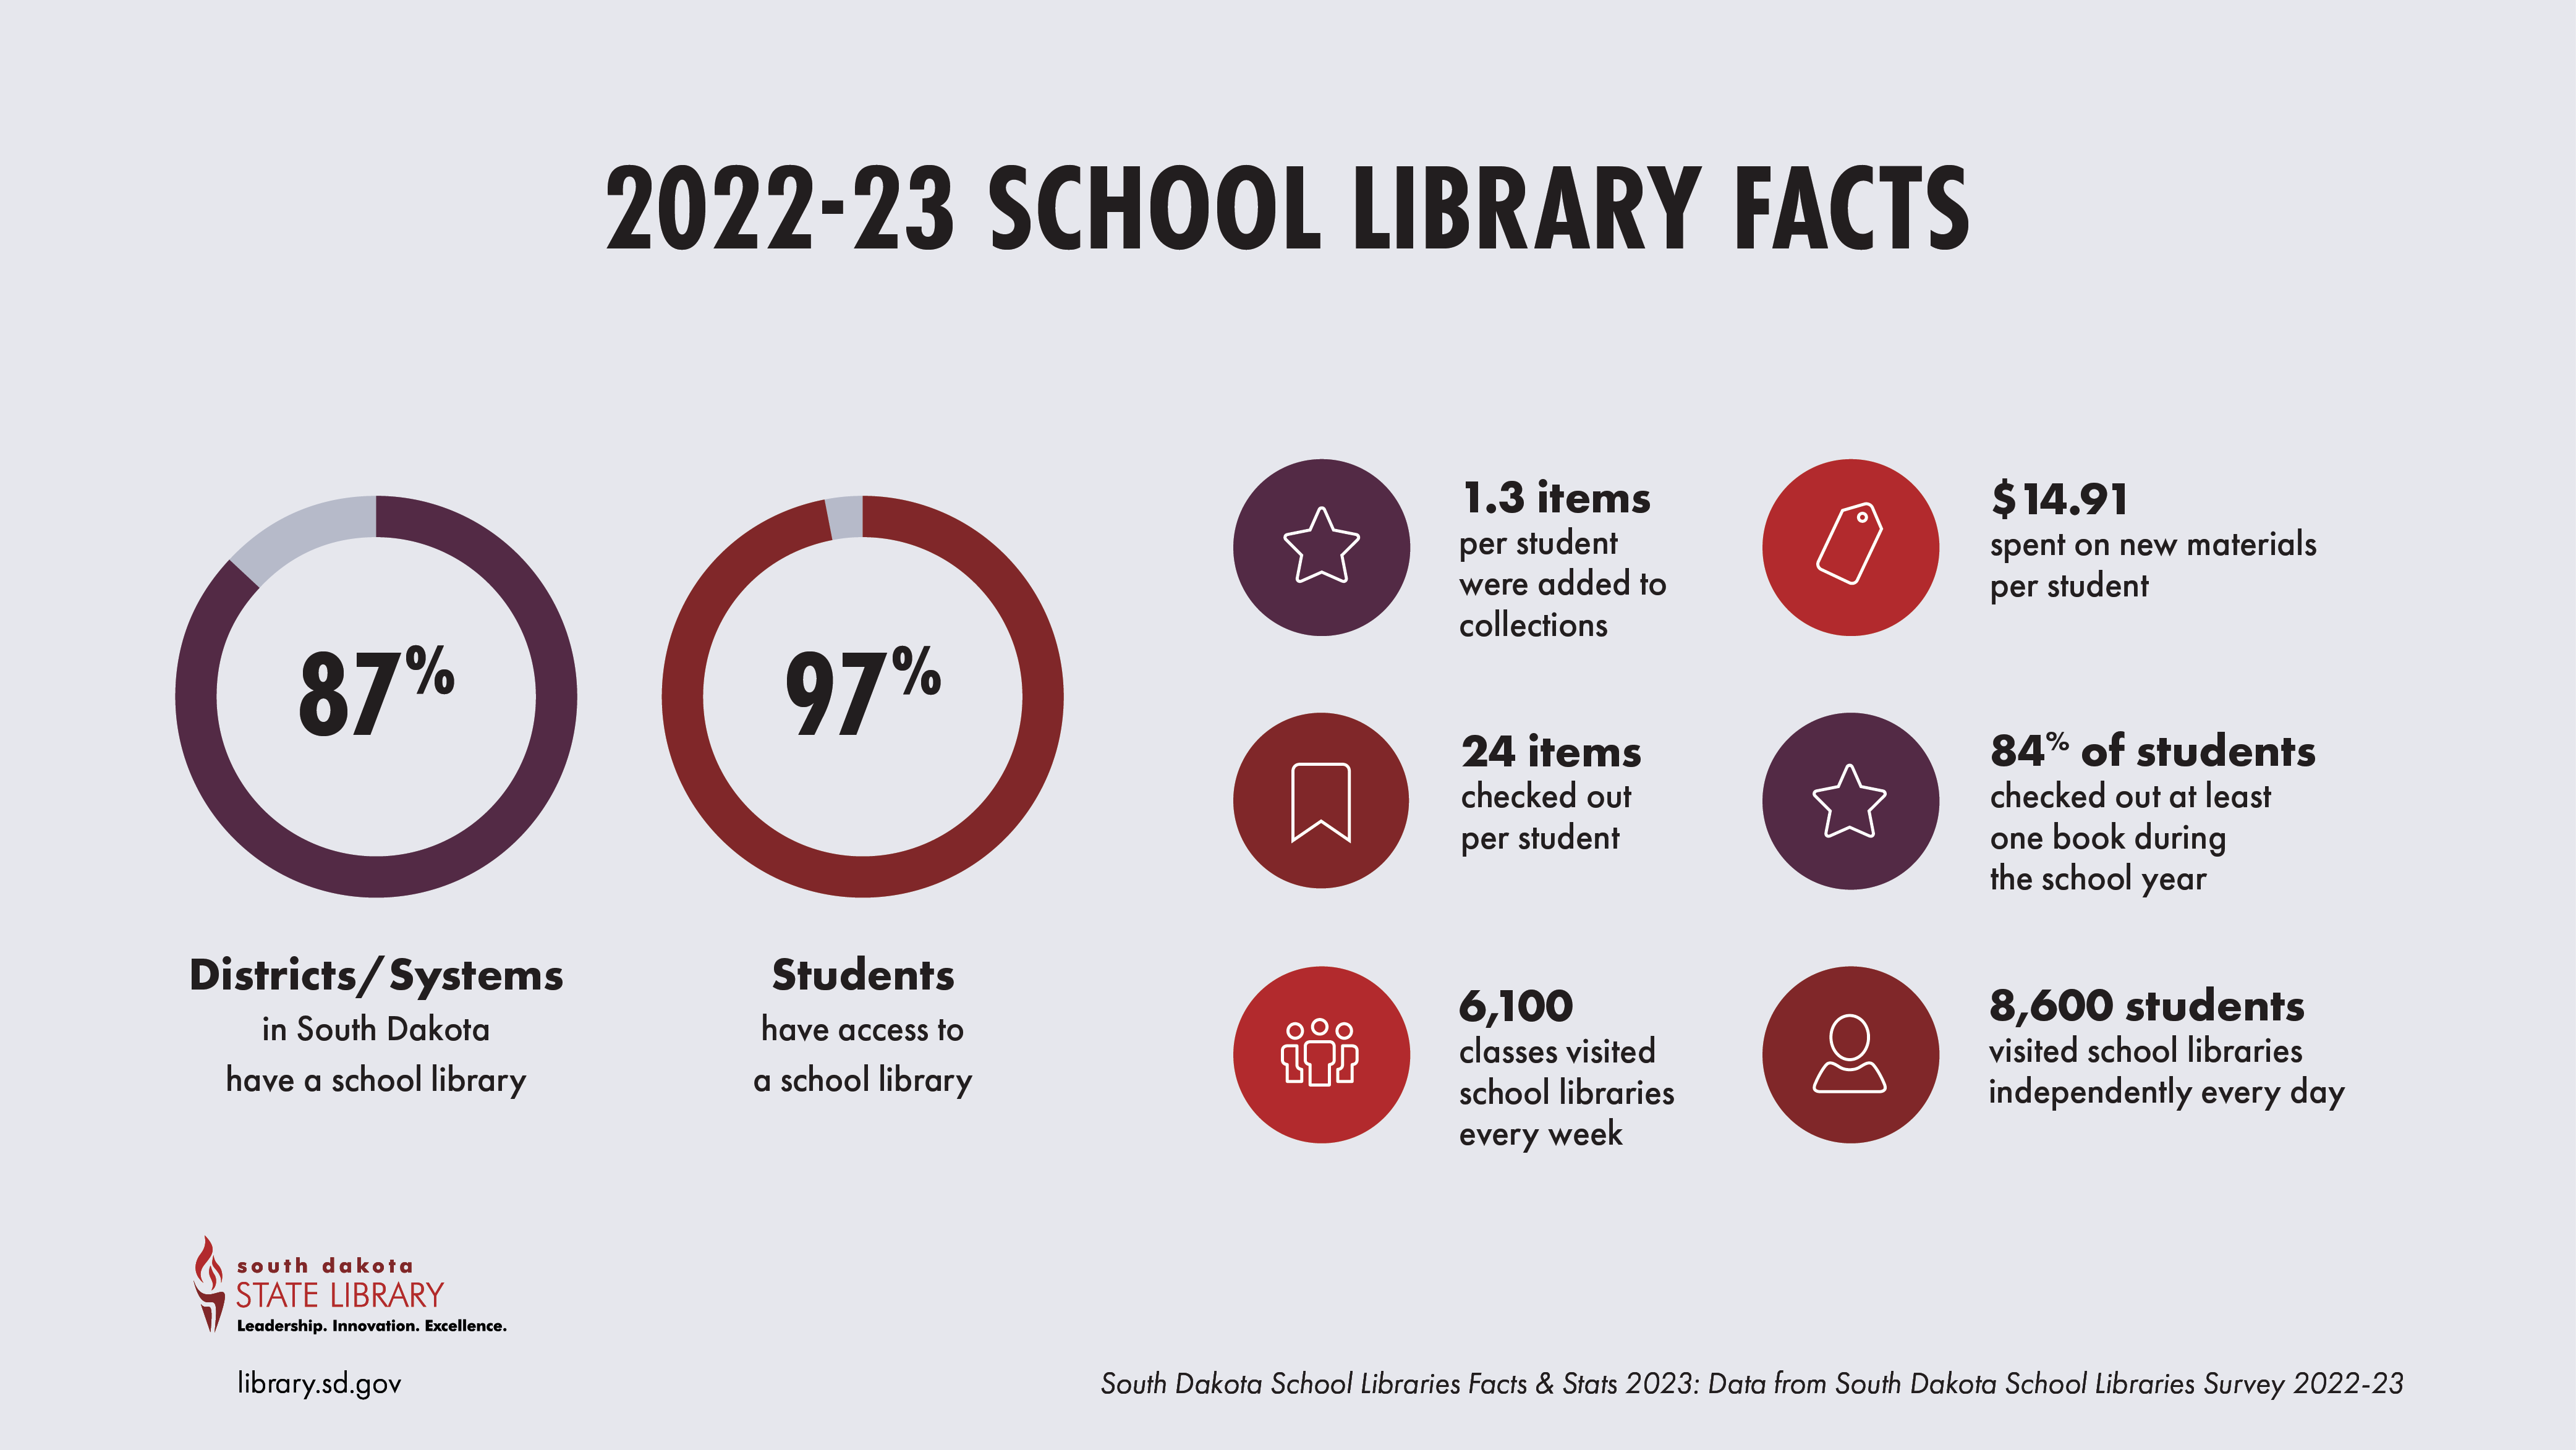 school library facts of 2022-23